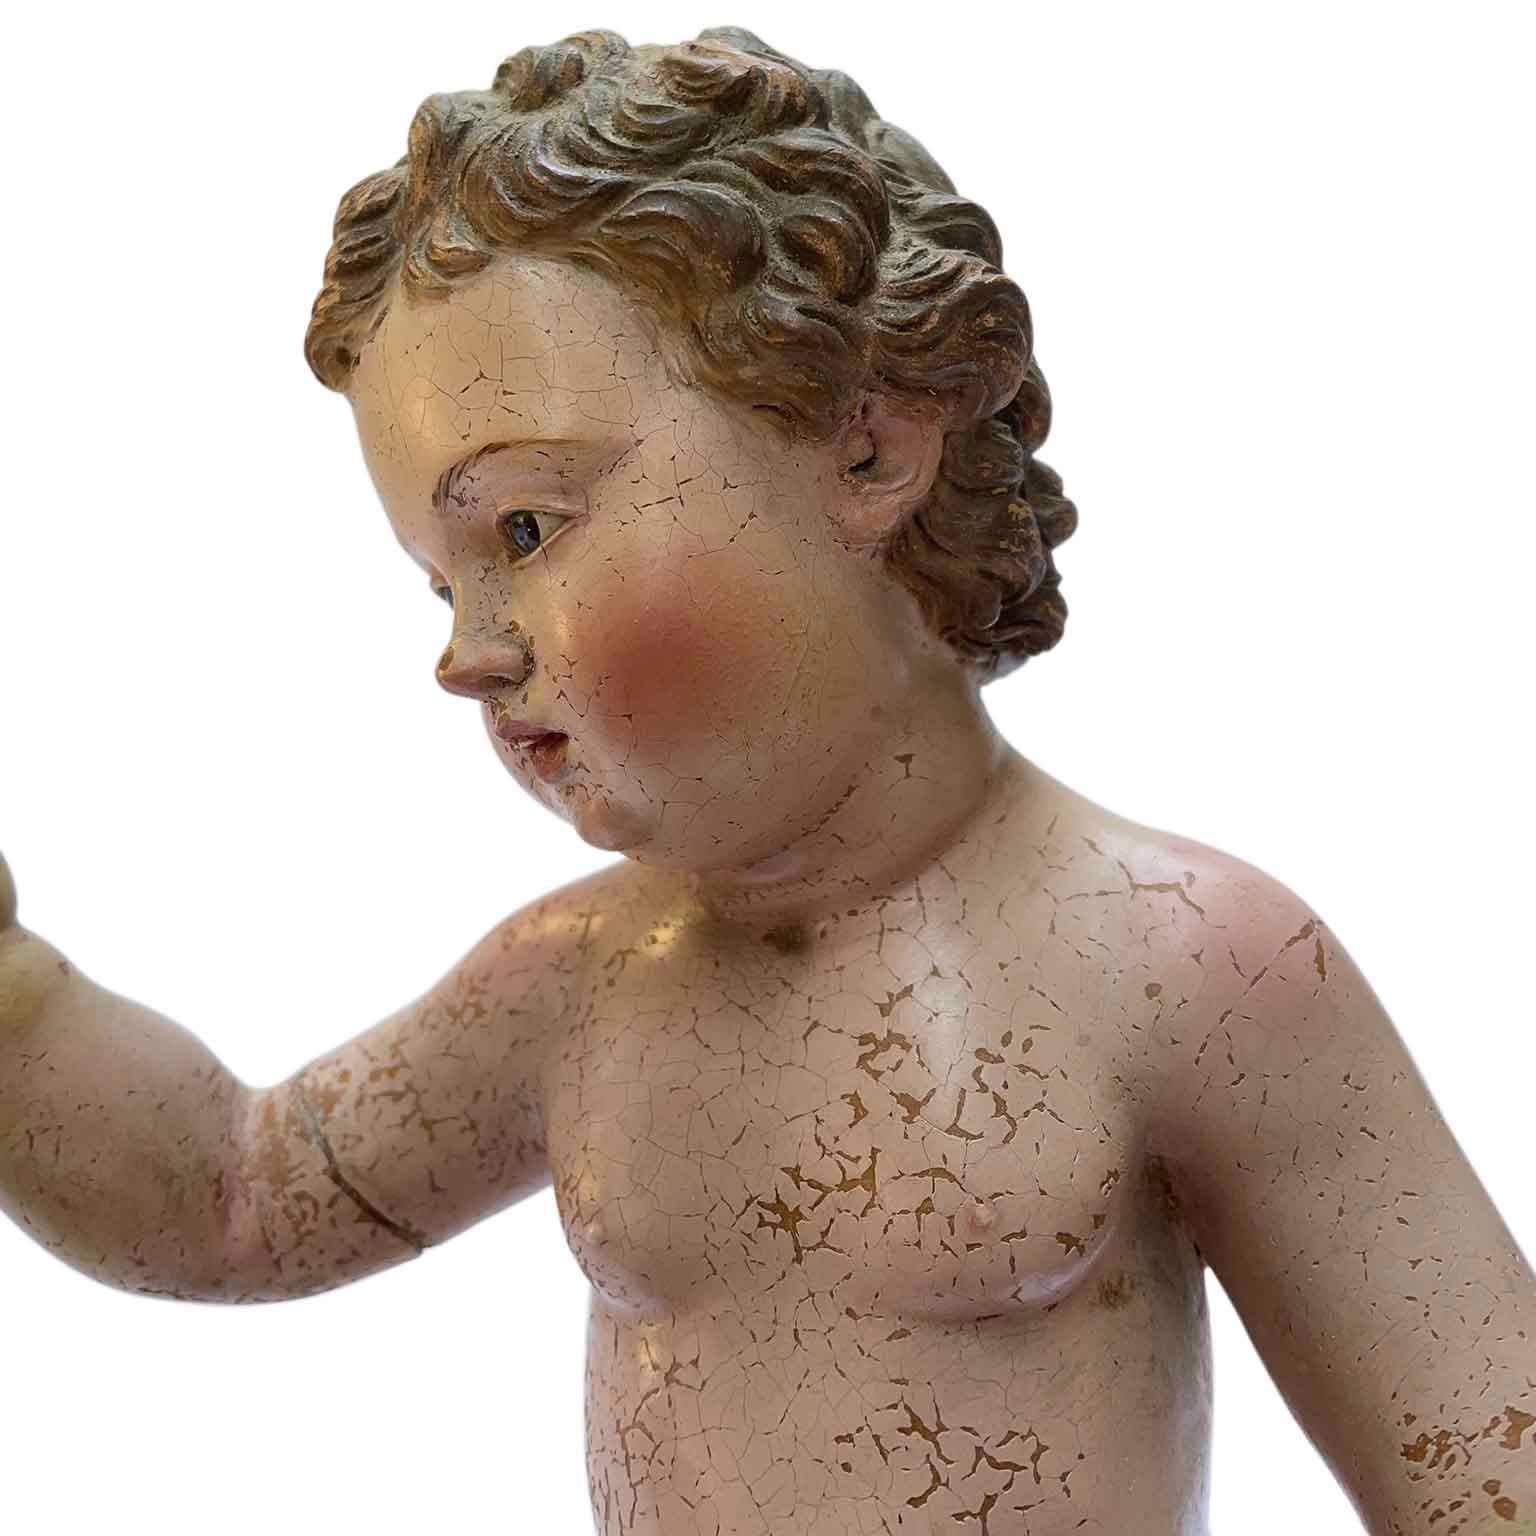 18th century Jesus Child Terracotta Sculpture an Italian Holy and devotional art polychromed figure  depicting Baby Jesus standing on an a carved and gold leaf giltwood square shaped pedestal. This basement top is unfinished and should have